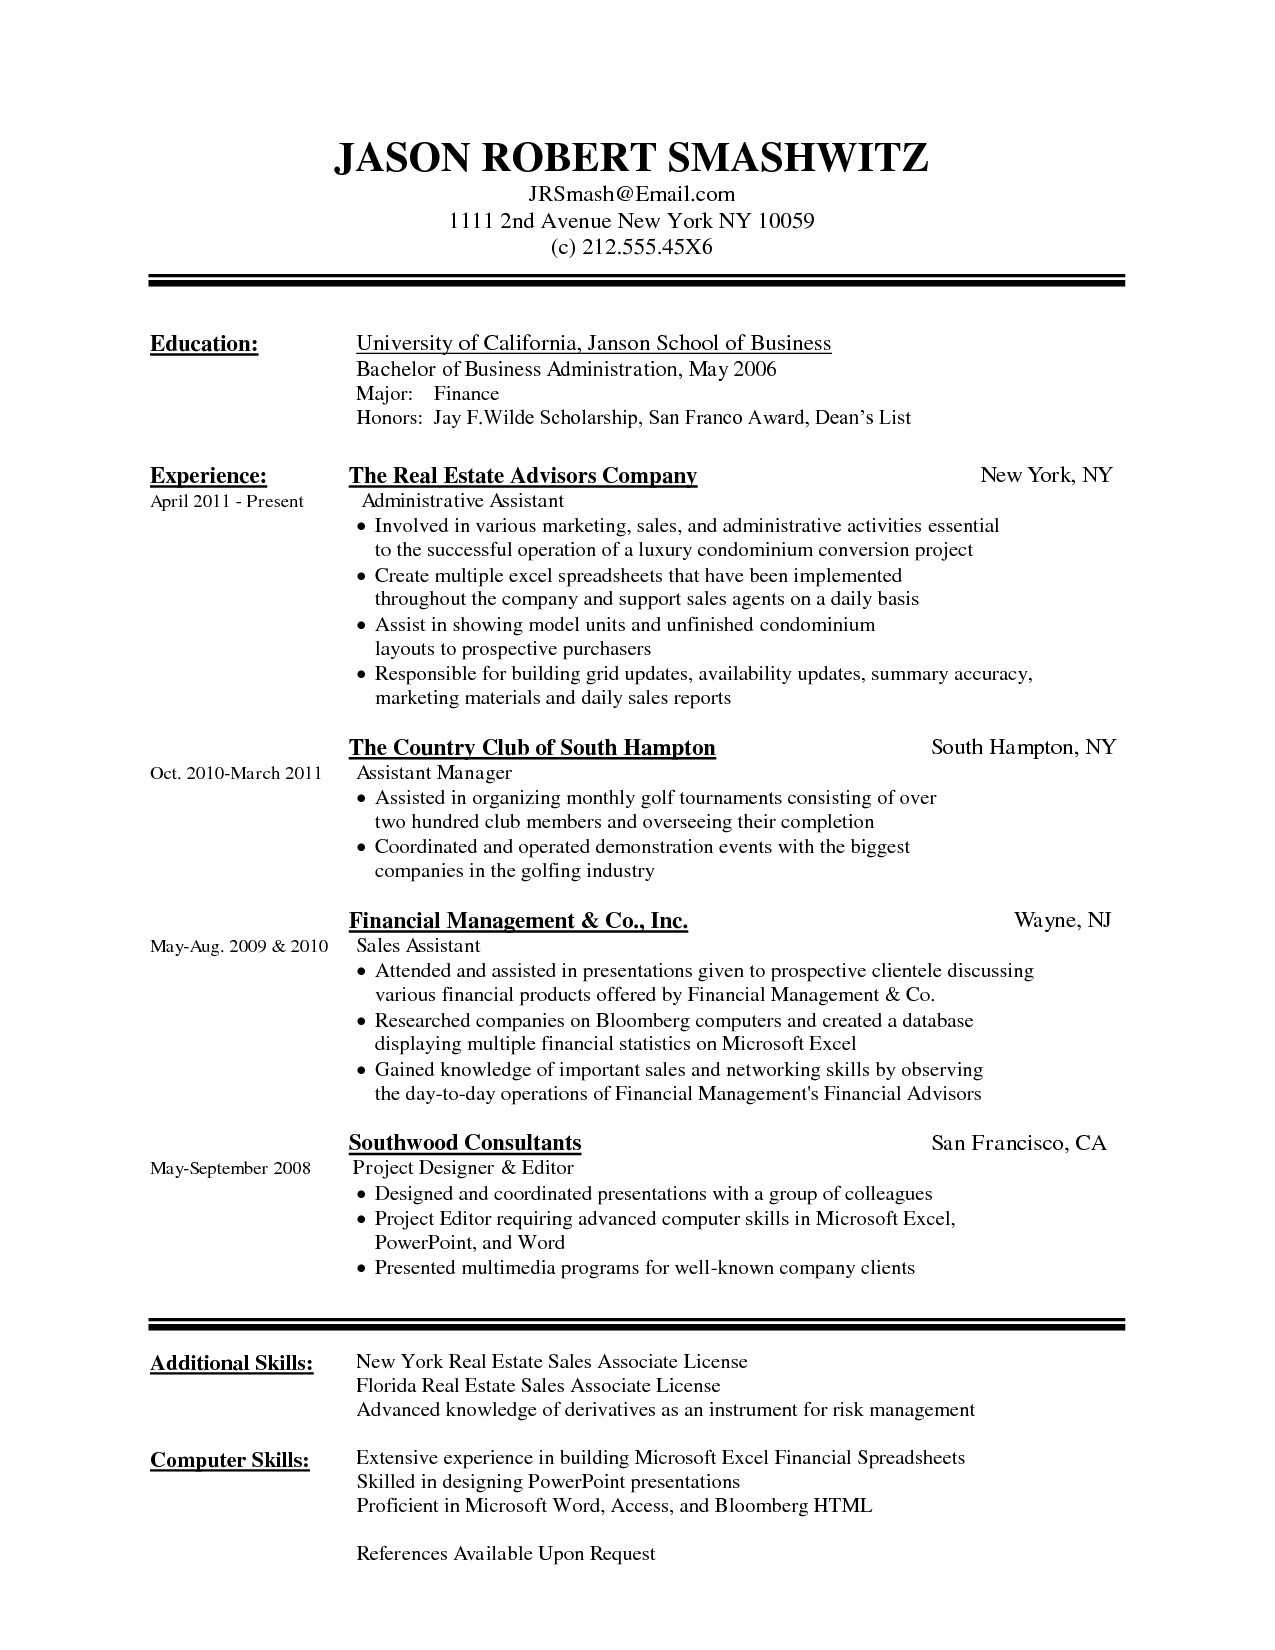 Awesome Resume Templates For Word 2010 - Superkepo Throughout Resume Templates Word 2010